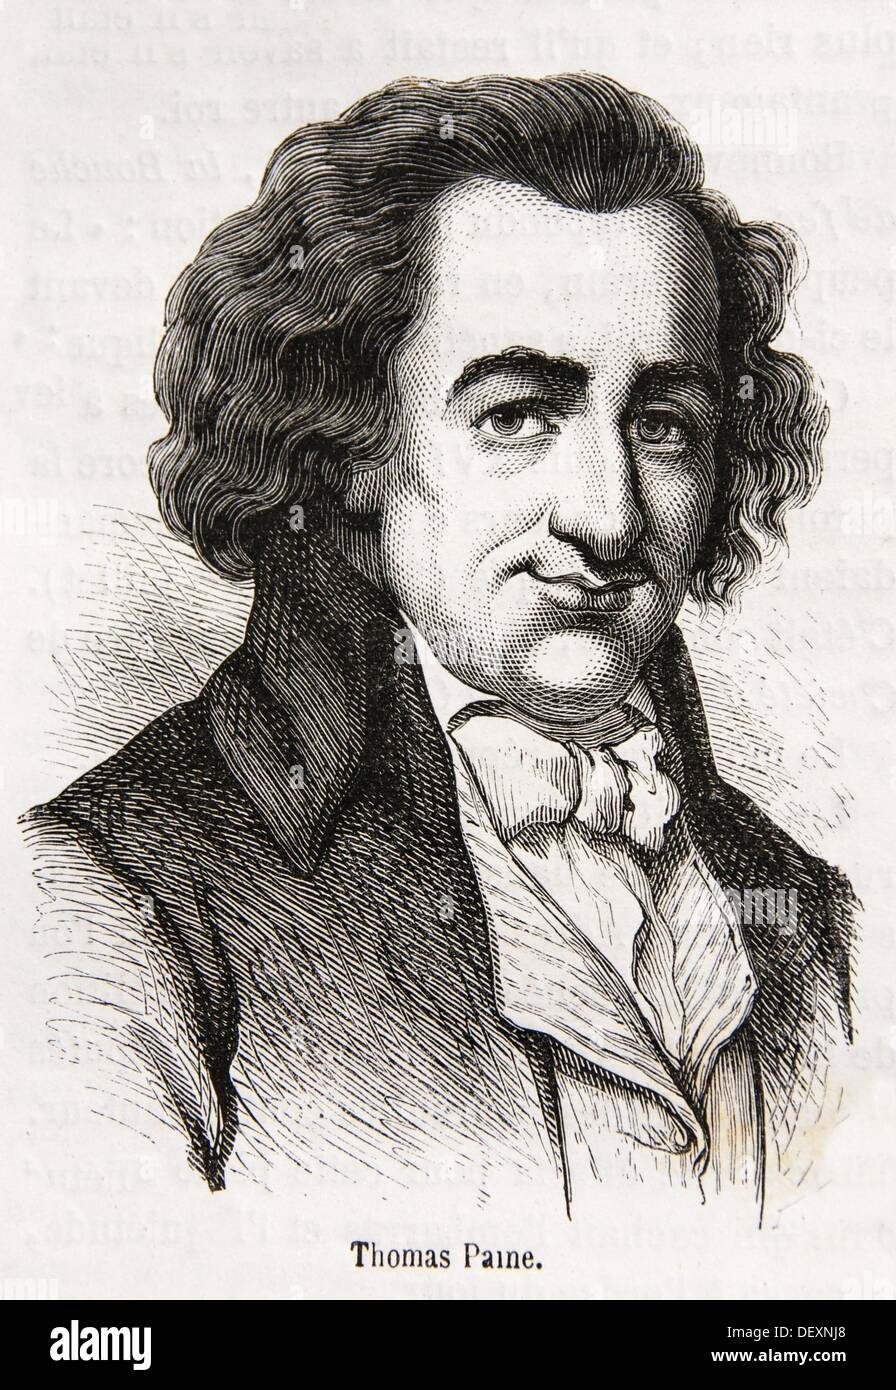 Thomas Paine February 9, 1737 O S  January 29, 1736 - June 8, 1809 was an author, pamphleteer, radical, inventor, intellectual, Stock Photo